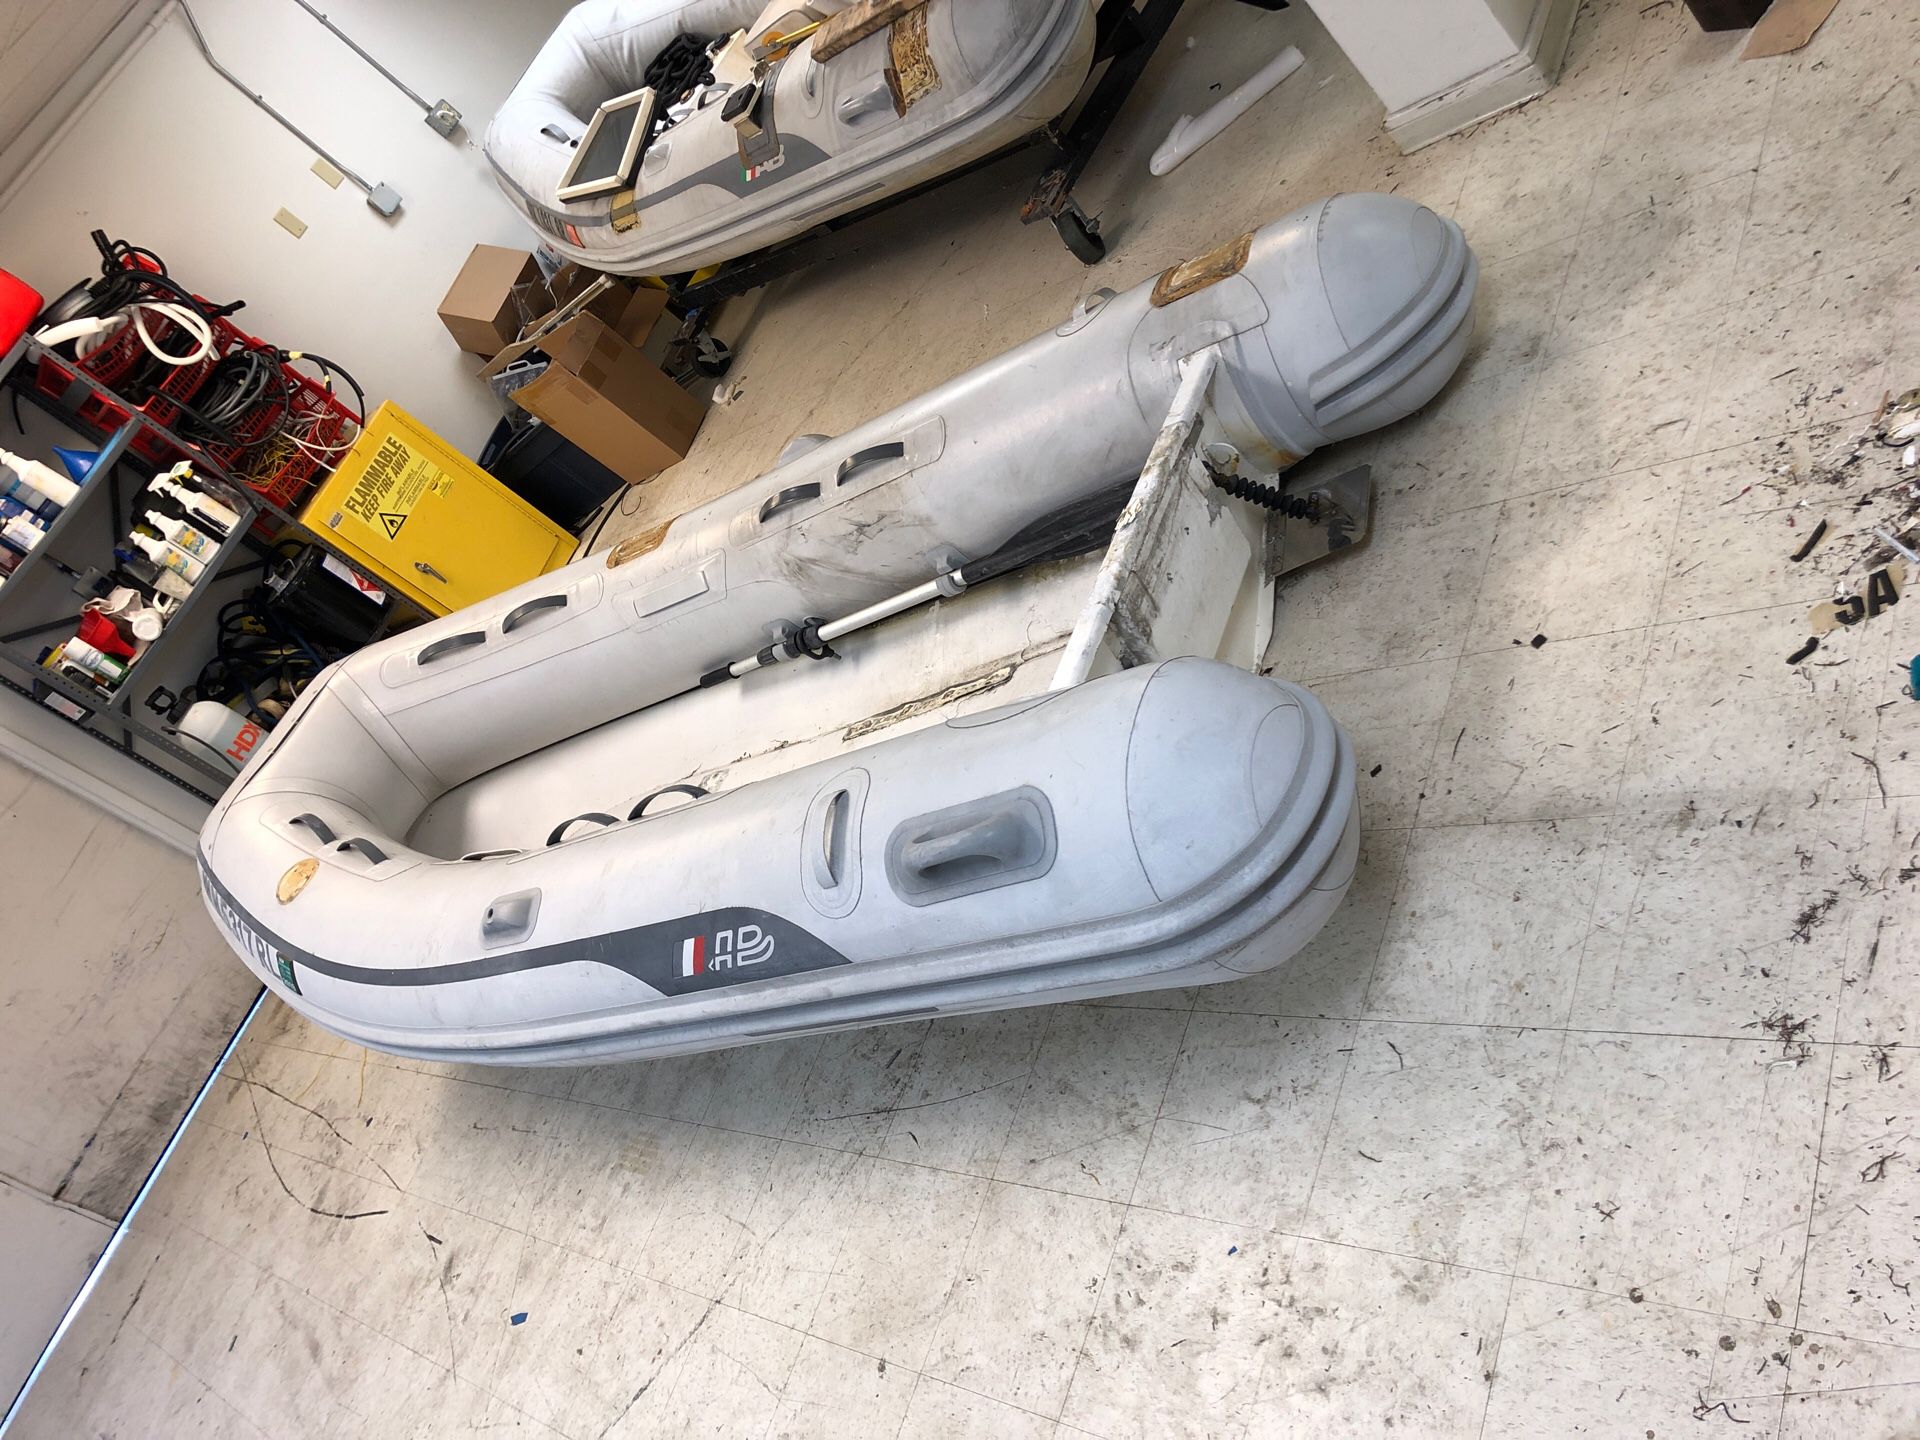 11’ AB inflatable boat with aluminum hull